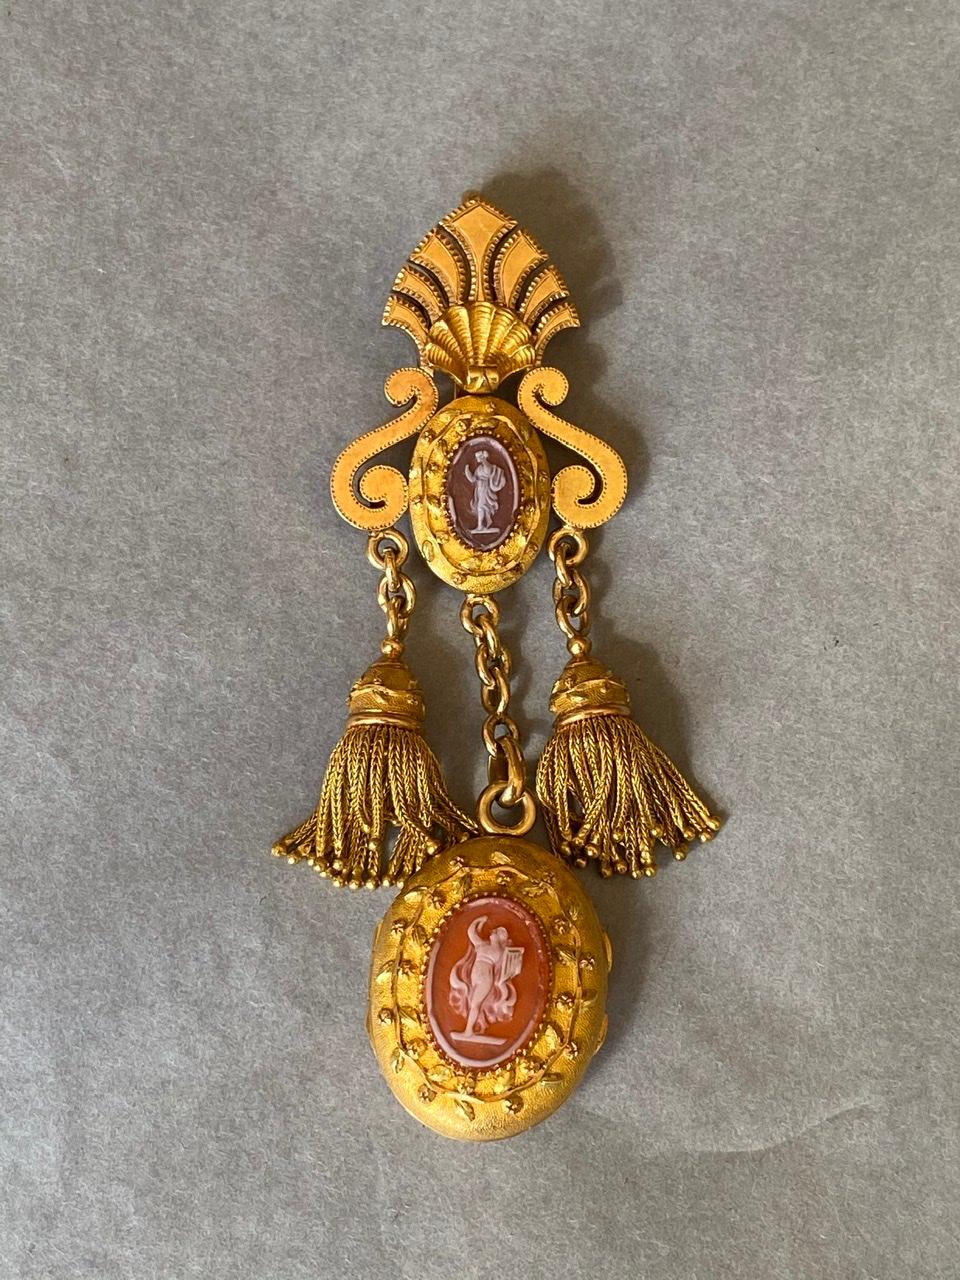 Napoleon III Antique Gold and Cameo French Locket Pendant